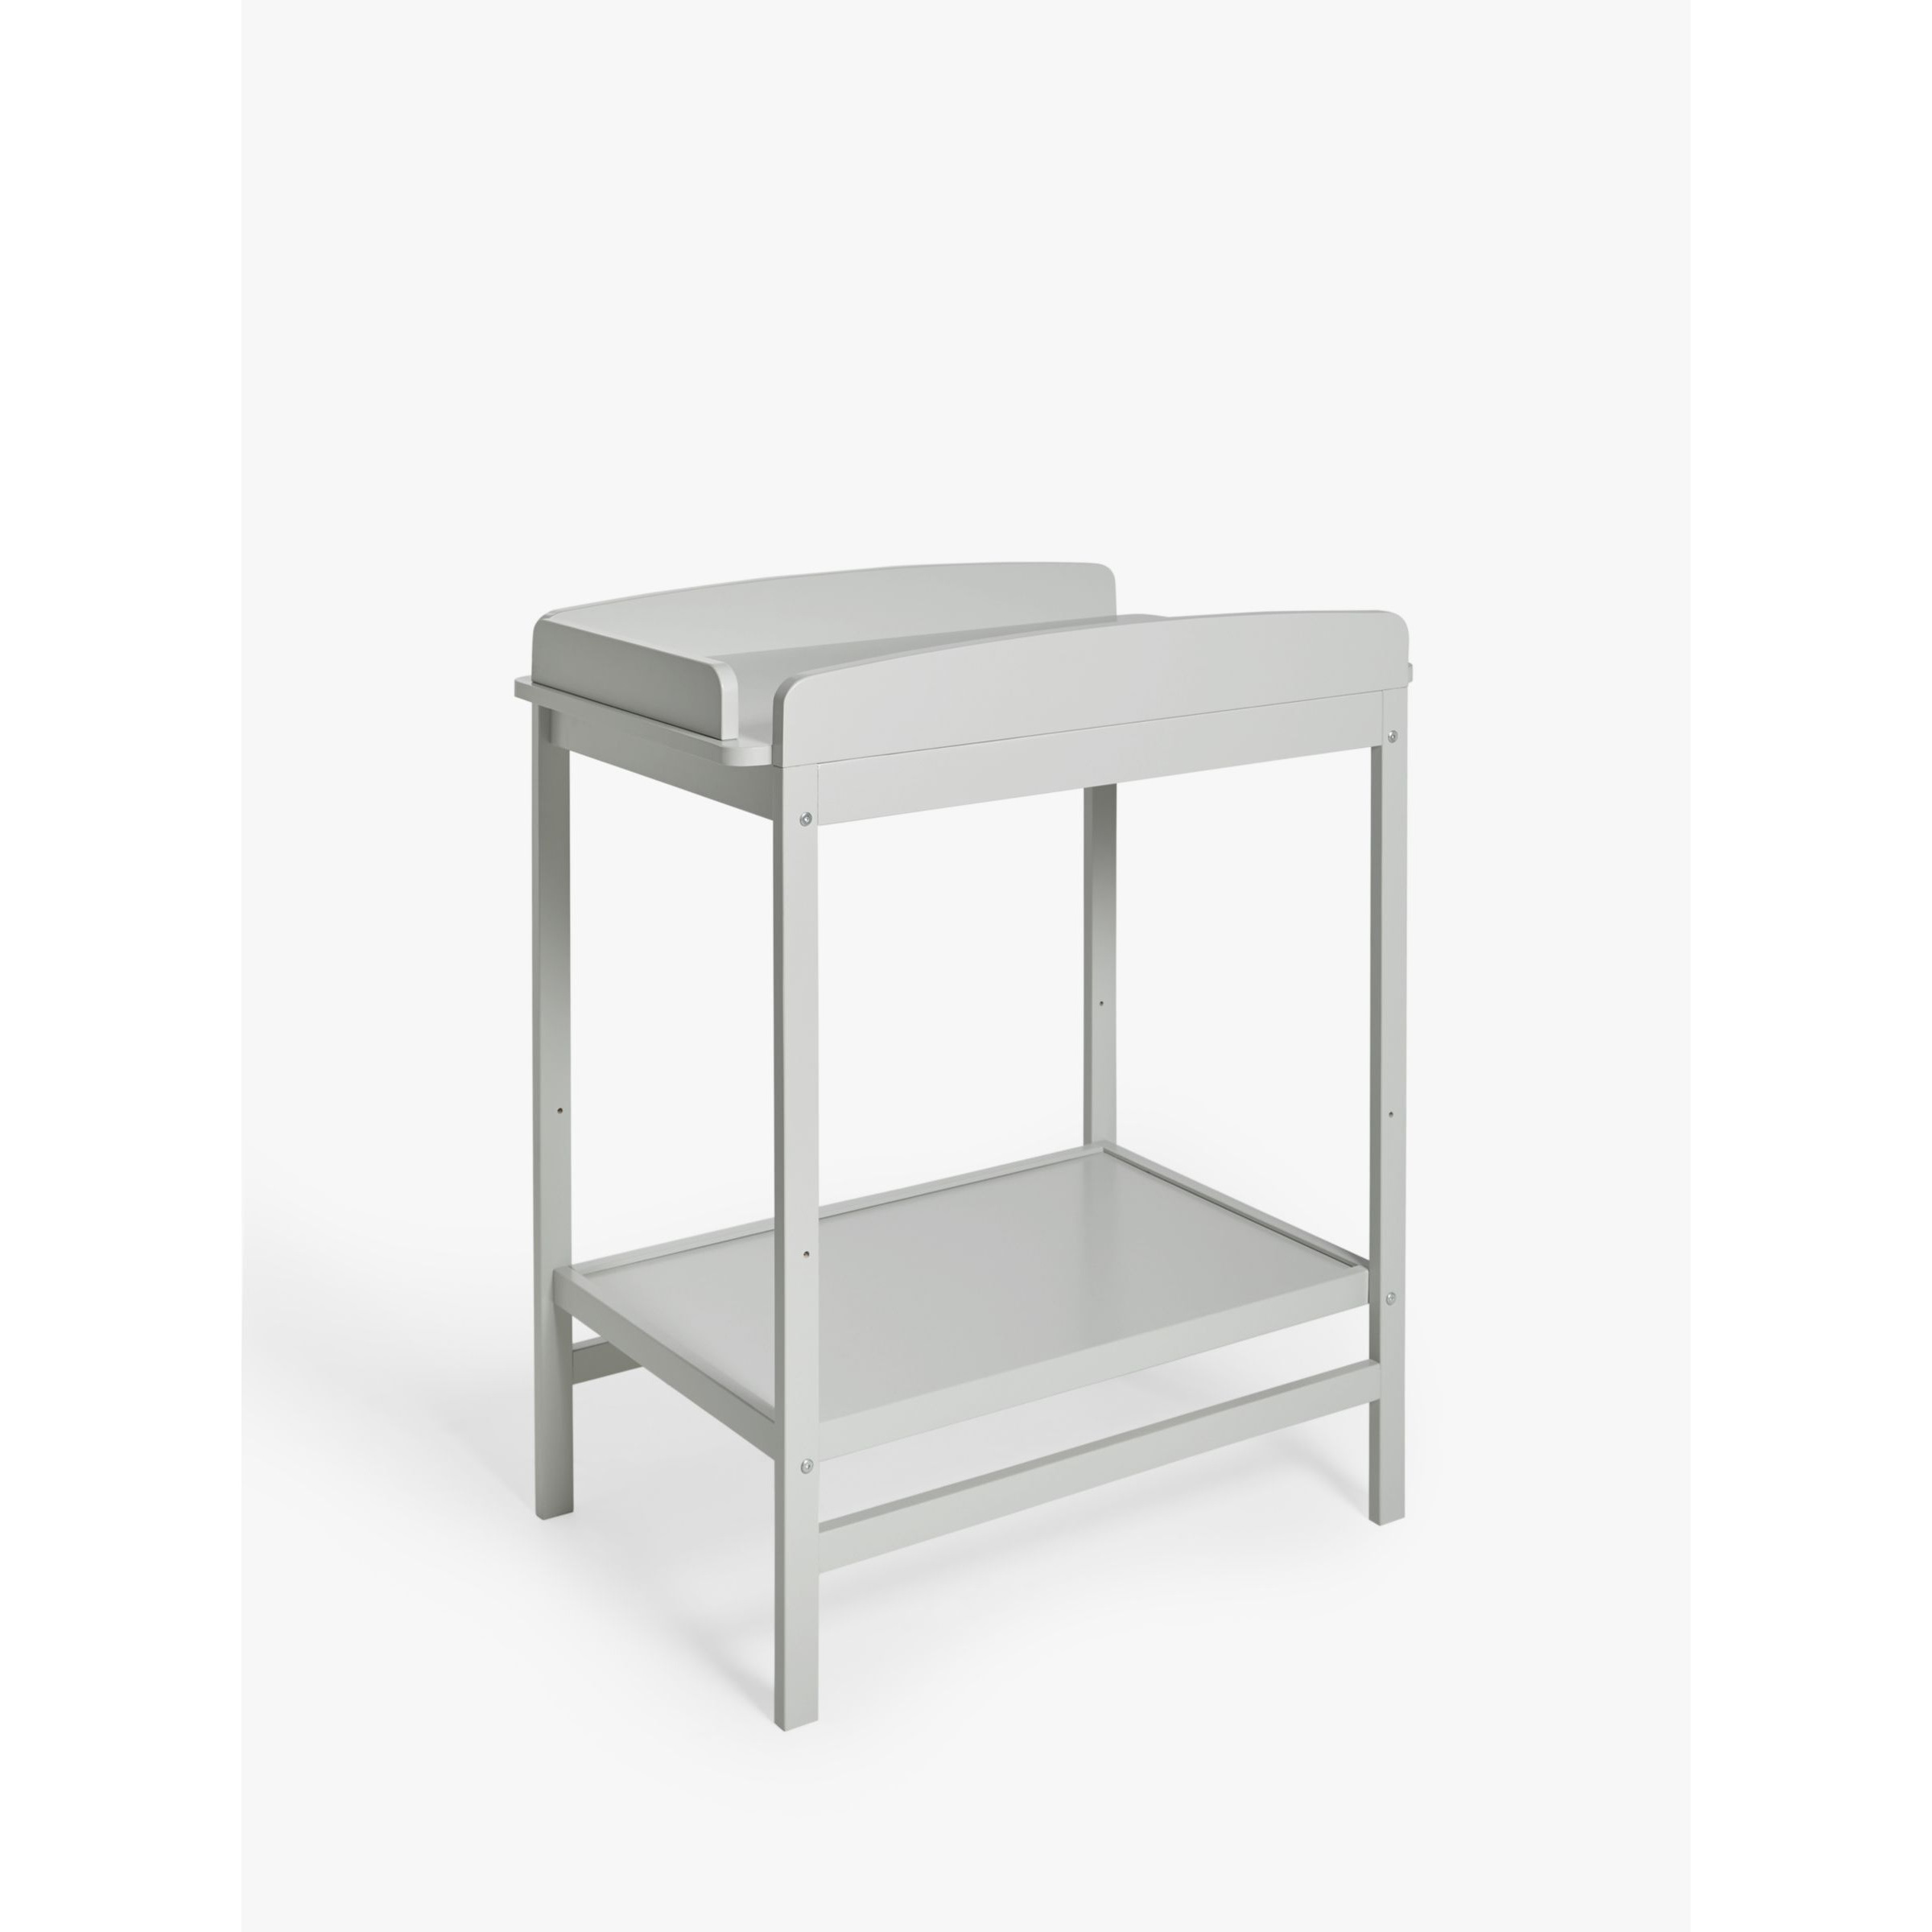 John Lewis ANYDAY Elementary Changing Table - image 1